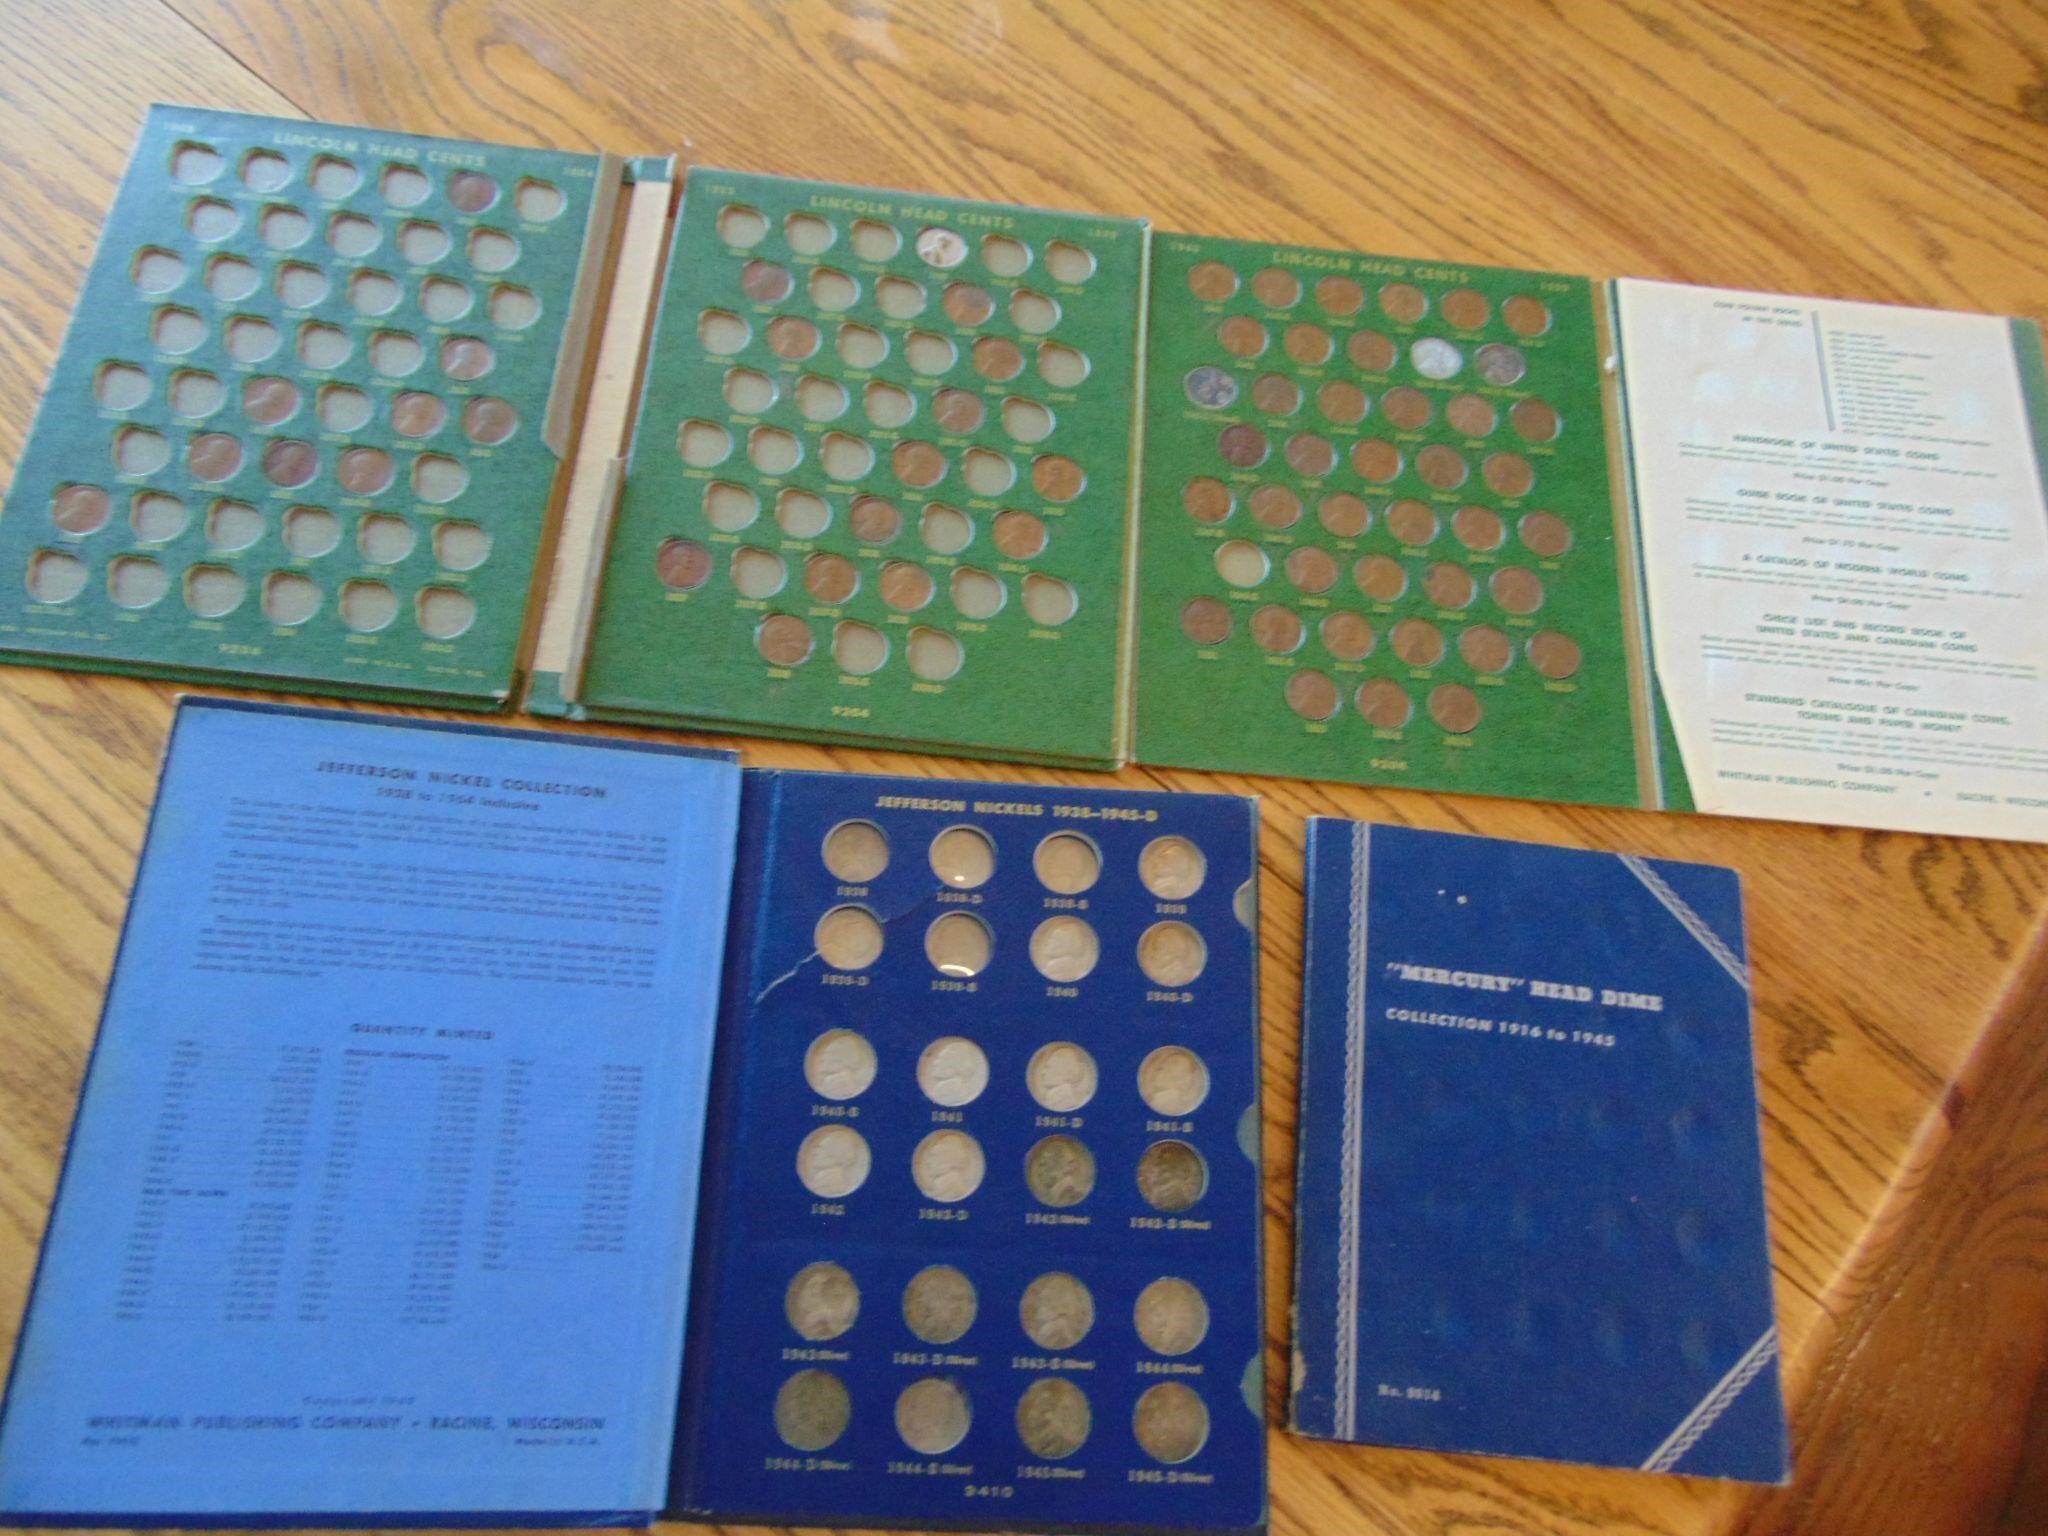 3 coin books with some silver nickels, old pennies